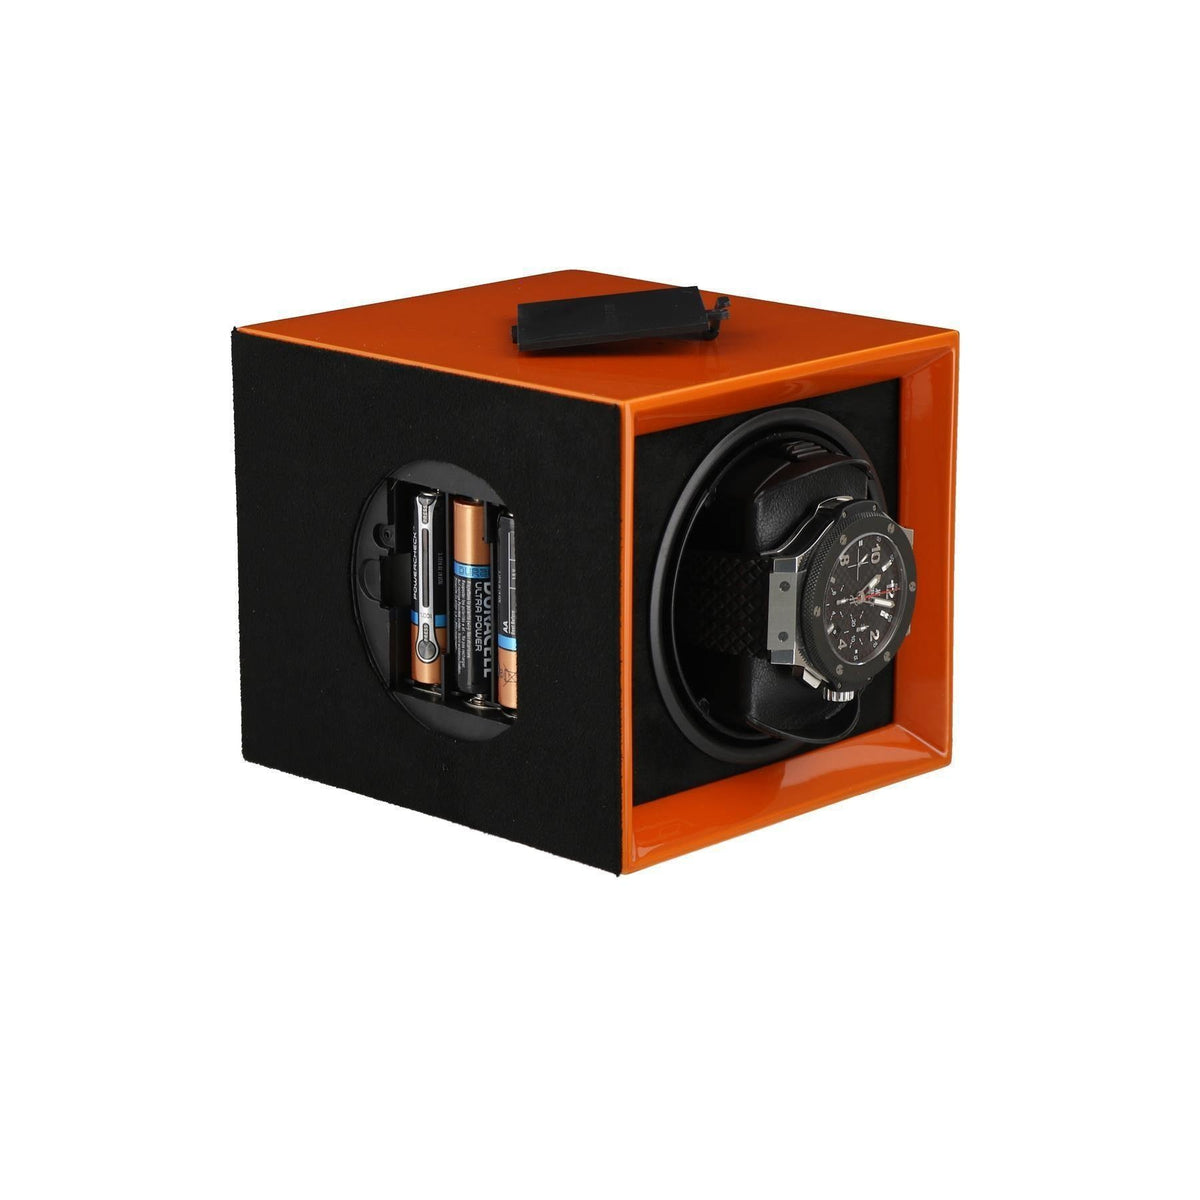 Watch Winder for 1 Automatic Watch in Orange Mains or Battery by Aevitas